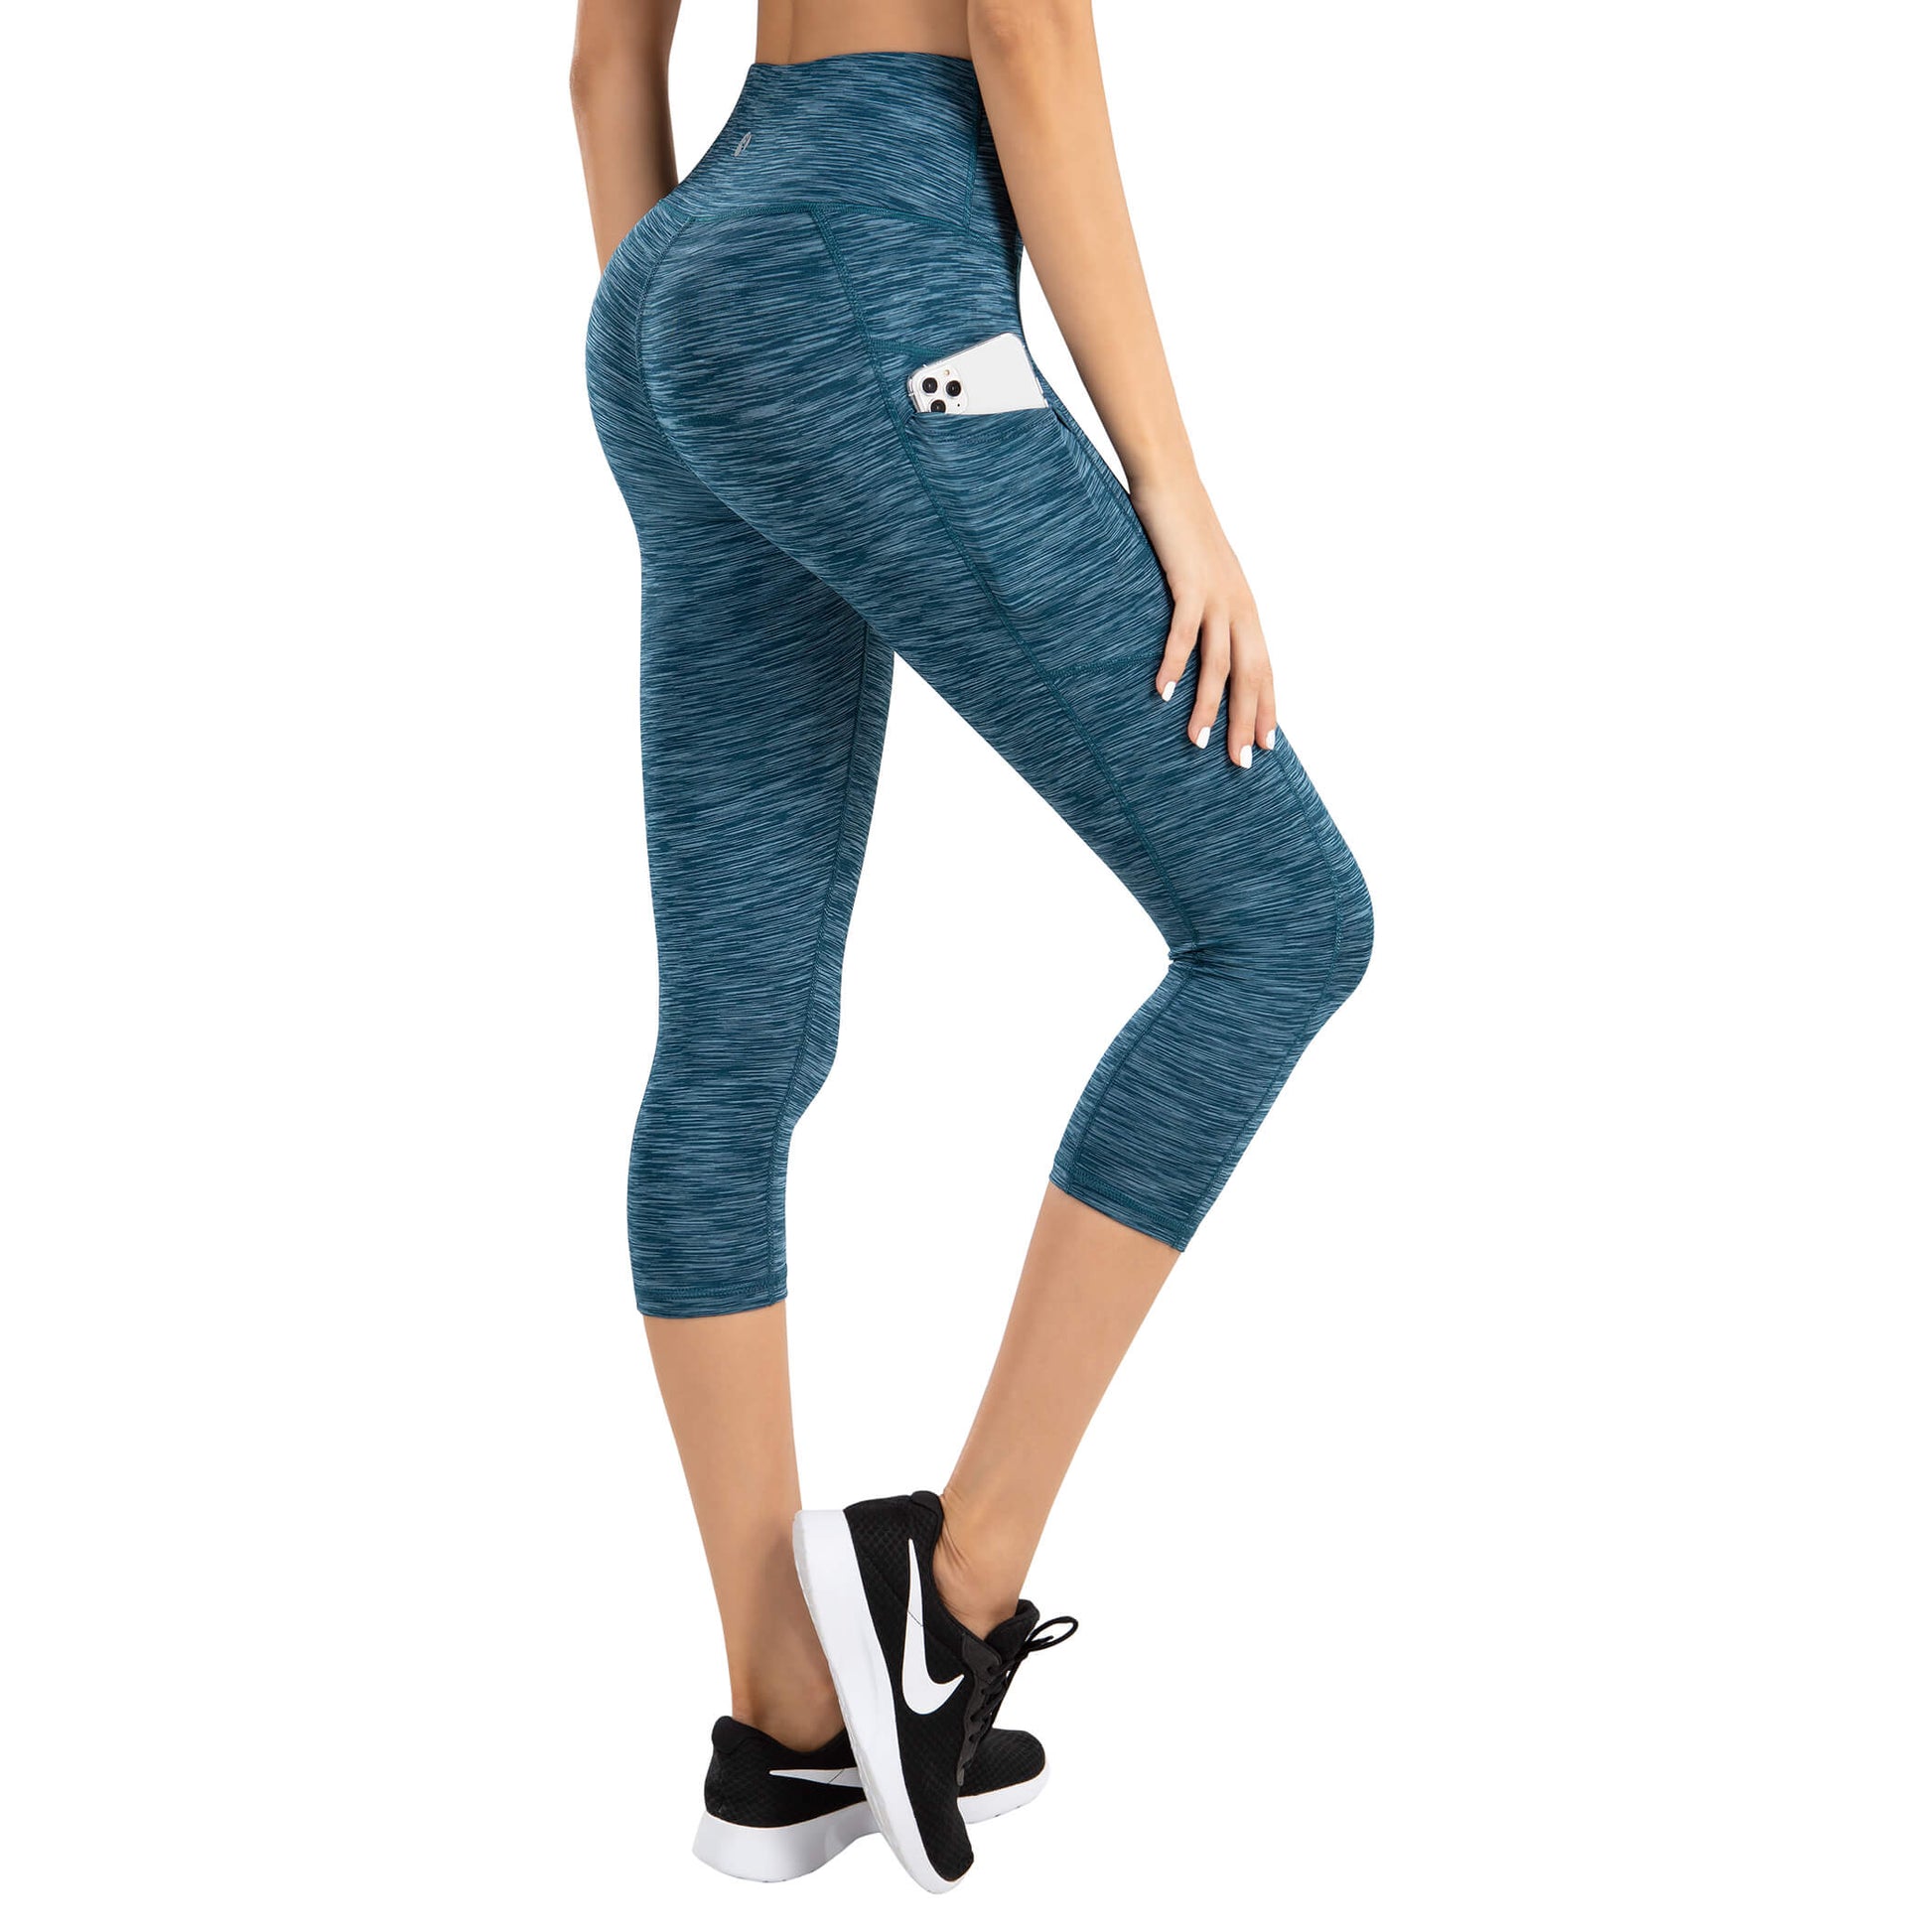 Here's a great deal! Buy our Lily Shapewear Yoga Capris for only